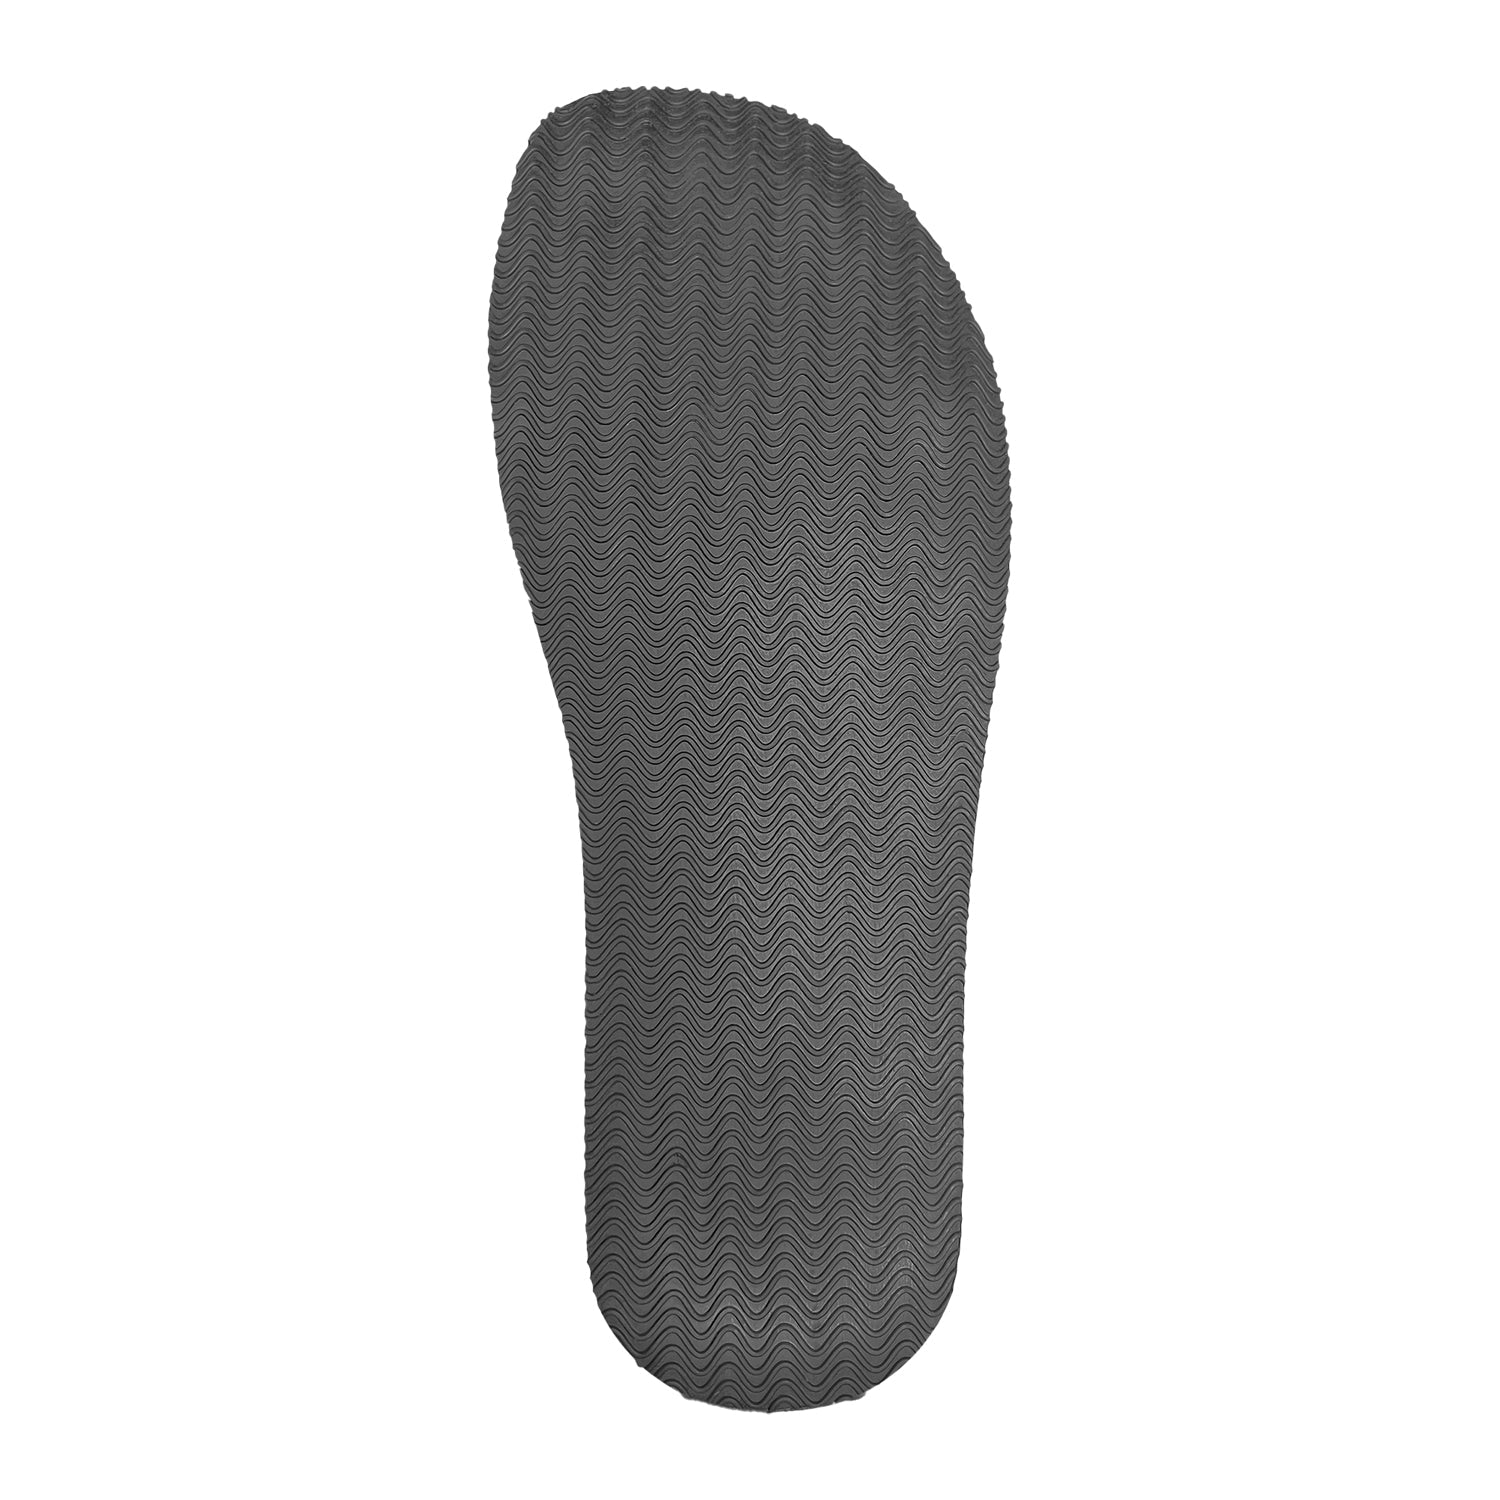 Gray Ursus Suede shoe sole featuring a wavy, zigzag tread pattern for enhanced grip, ideal for strength athletes and designed as part of a Bearfoot training sneaker.